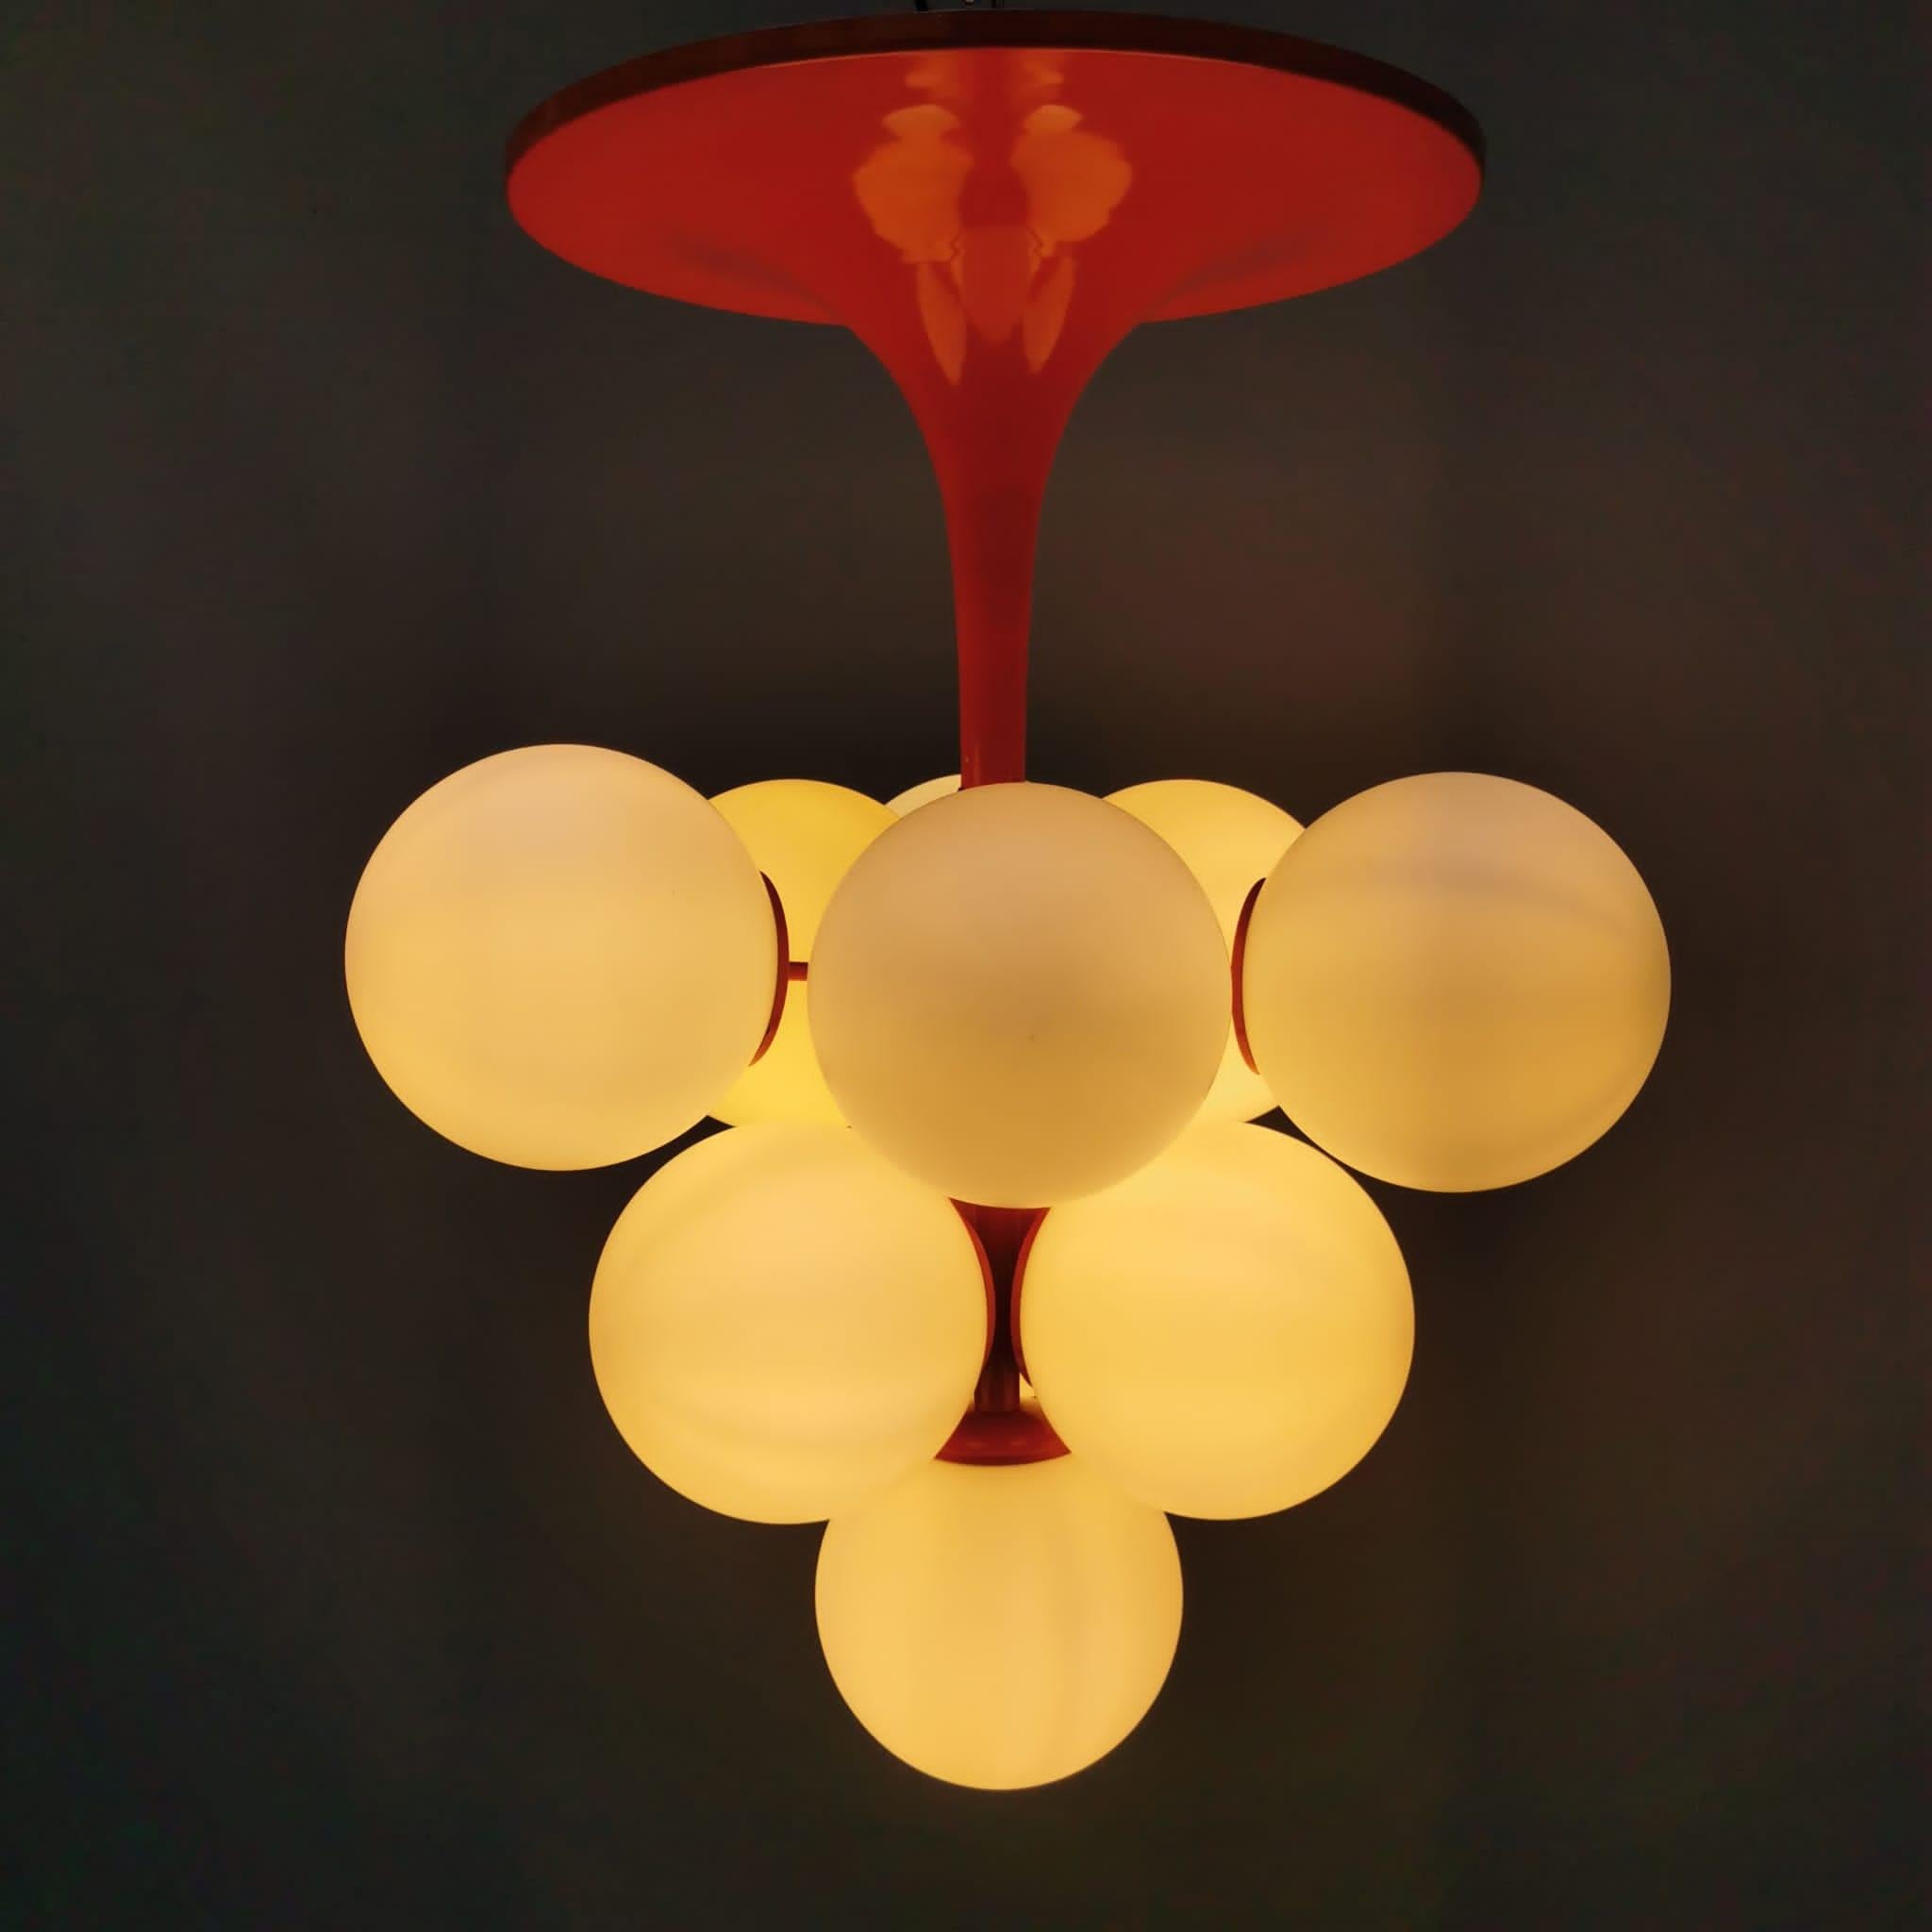 European Mid-Century Tulip Chandelier in Glass and Red Metal, by Nele for Temde